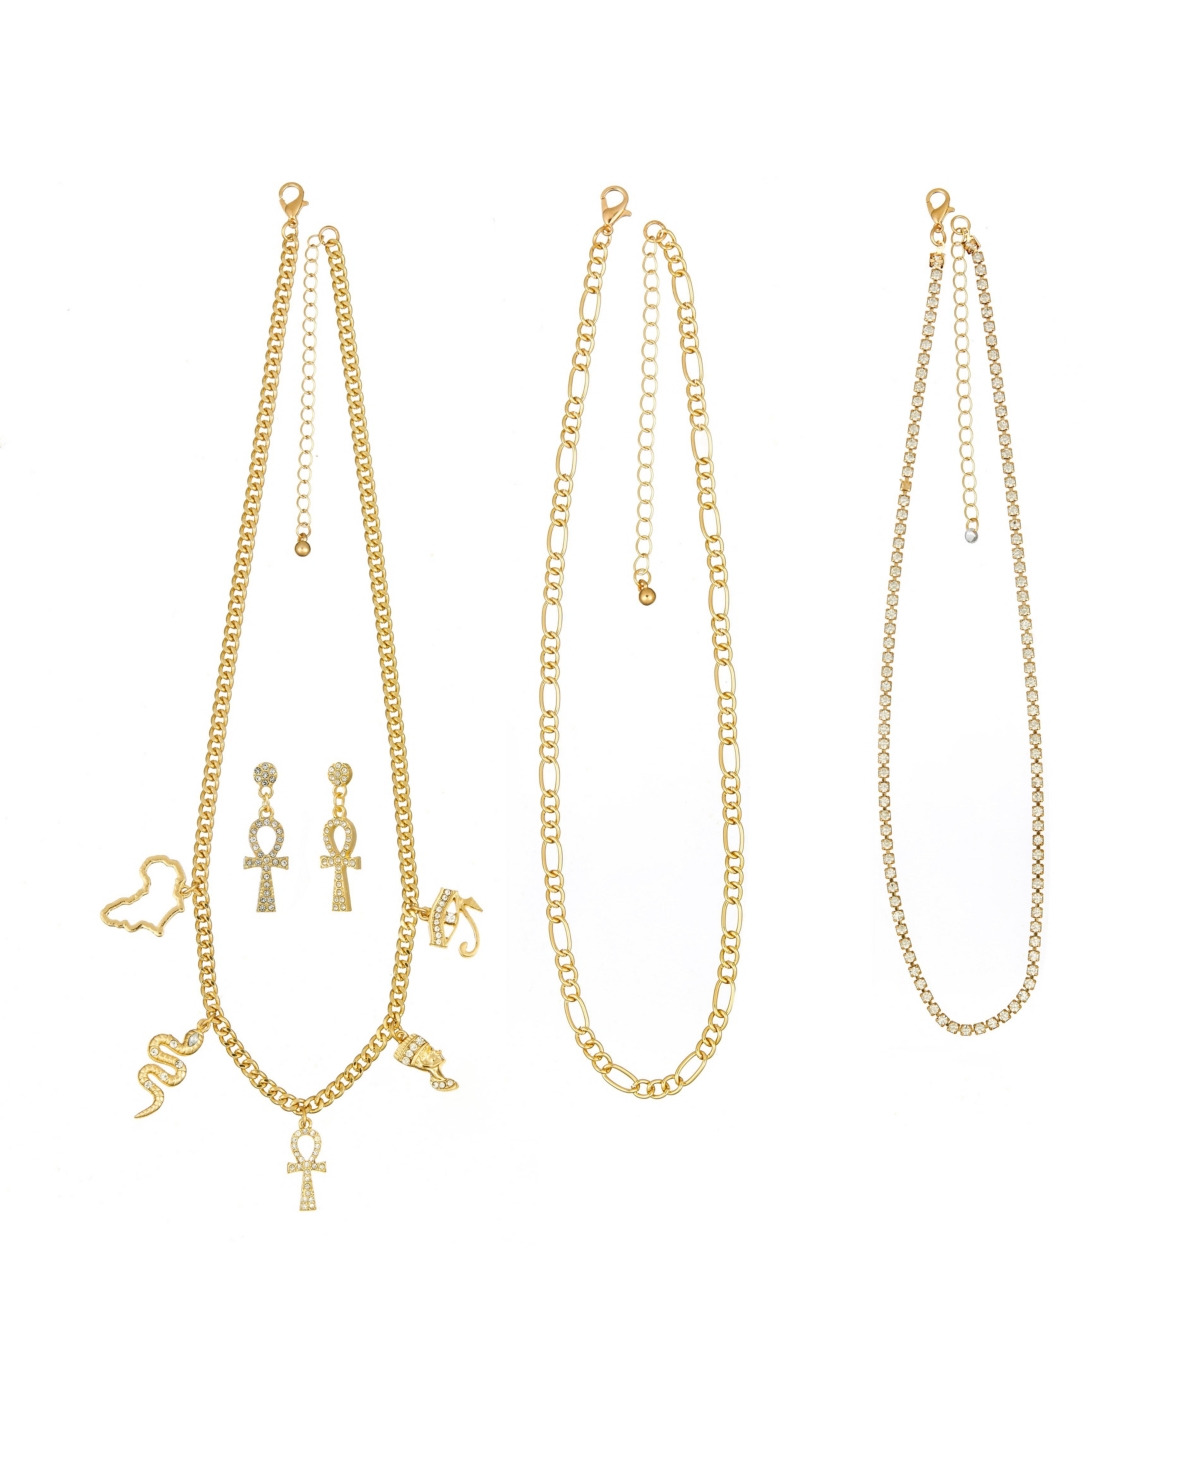 3Pc Ankh Necklace And Earring Set - Gold